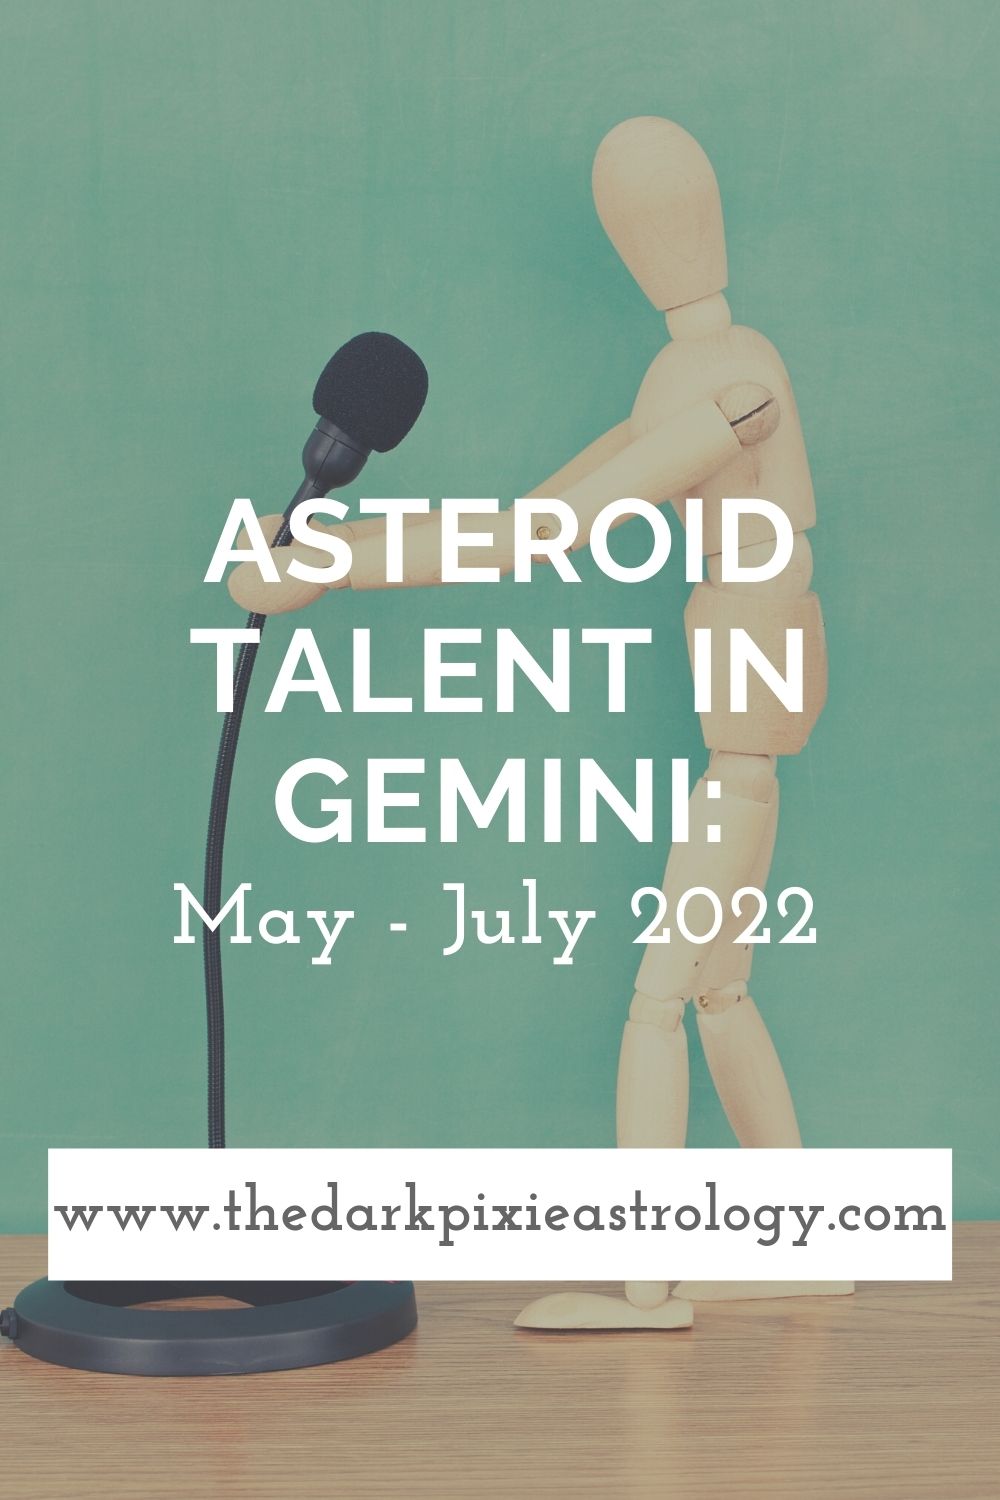 Asteroid Talent in Gemini: May - July 2022 - The Dark Pixie Astrology